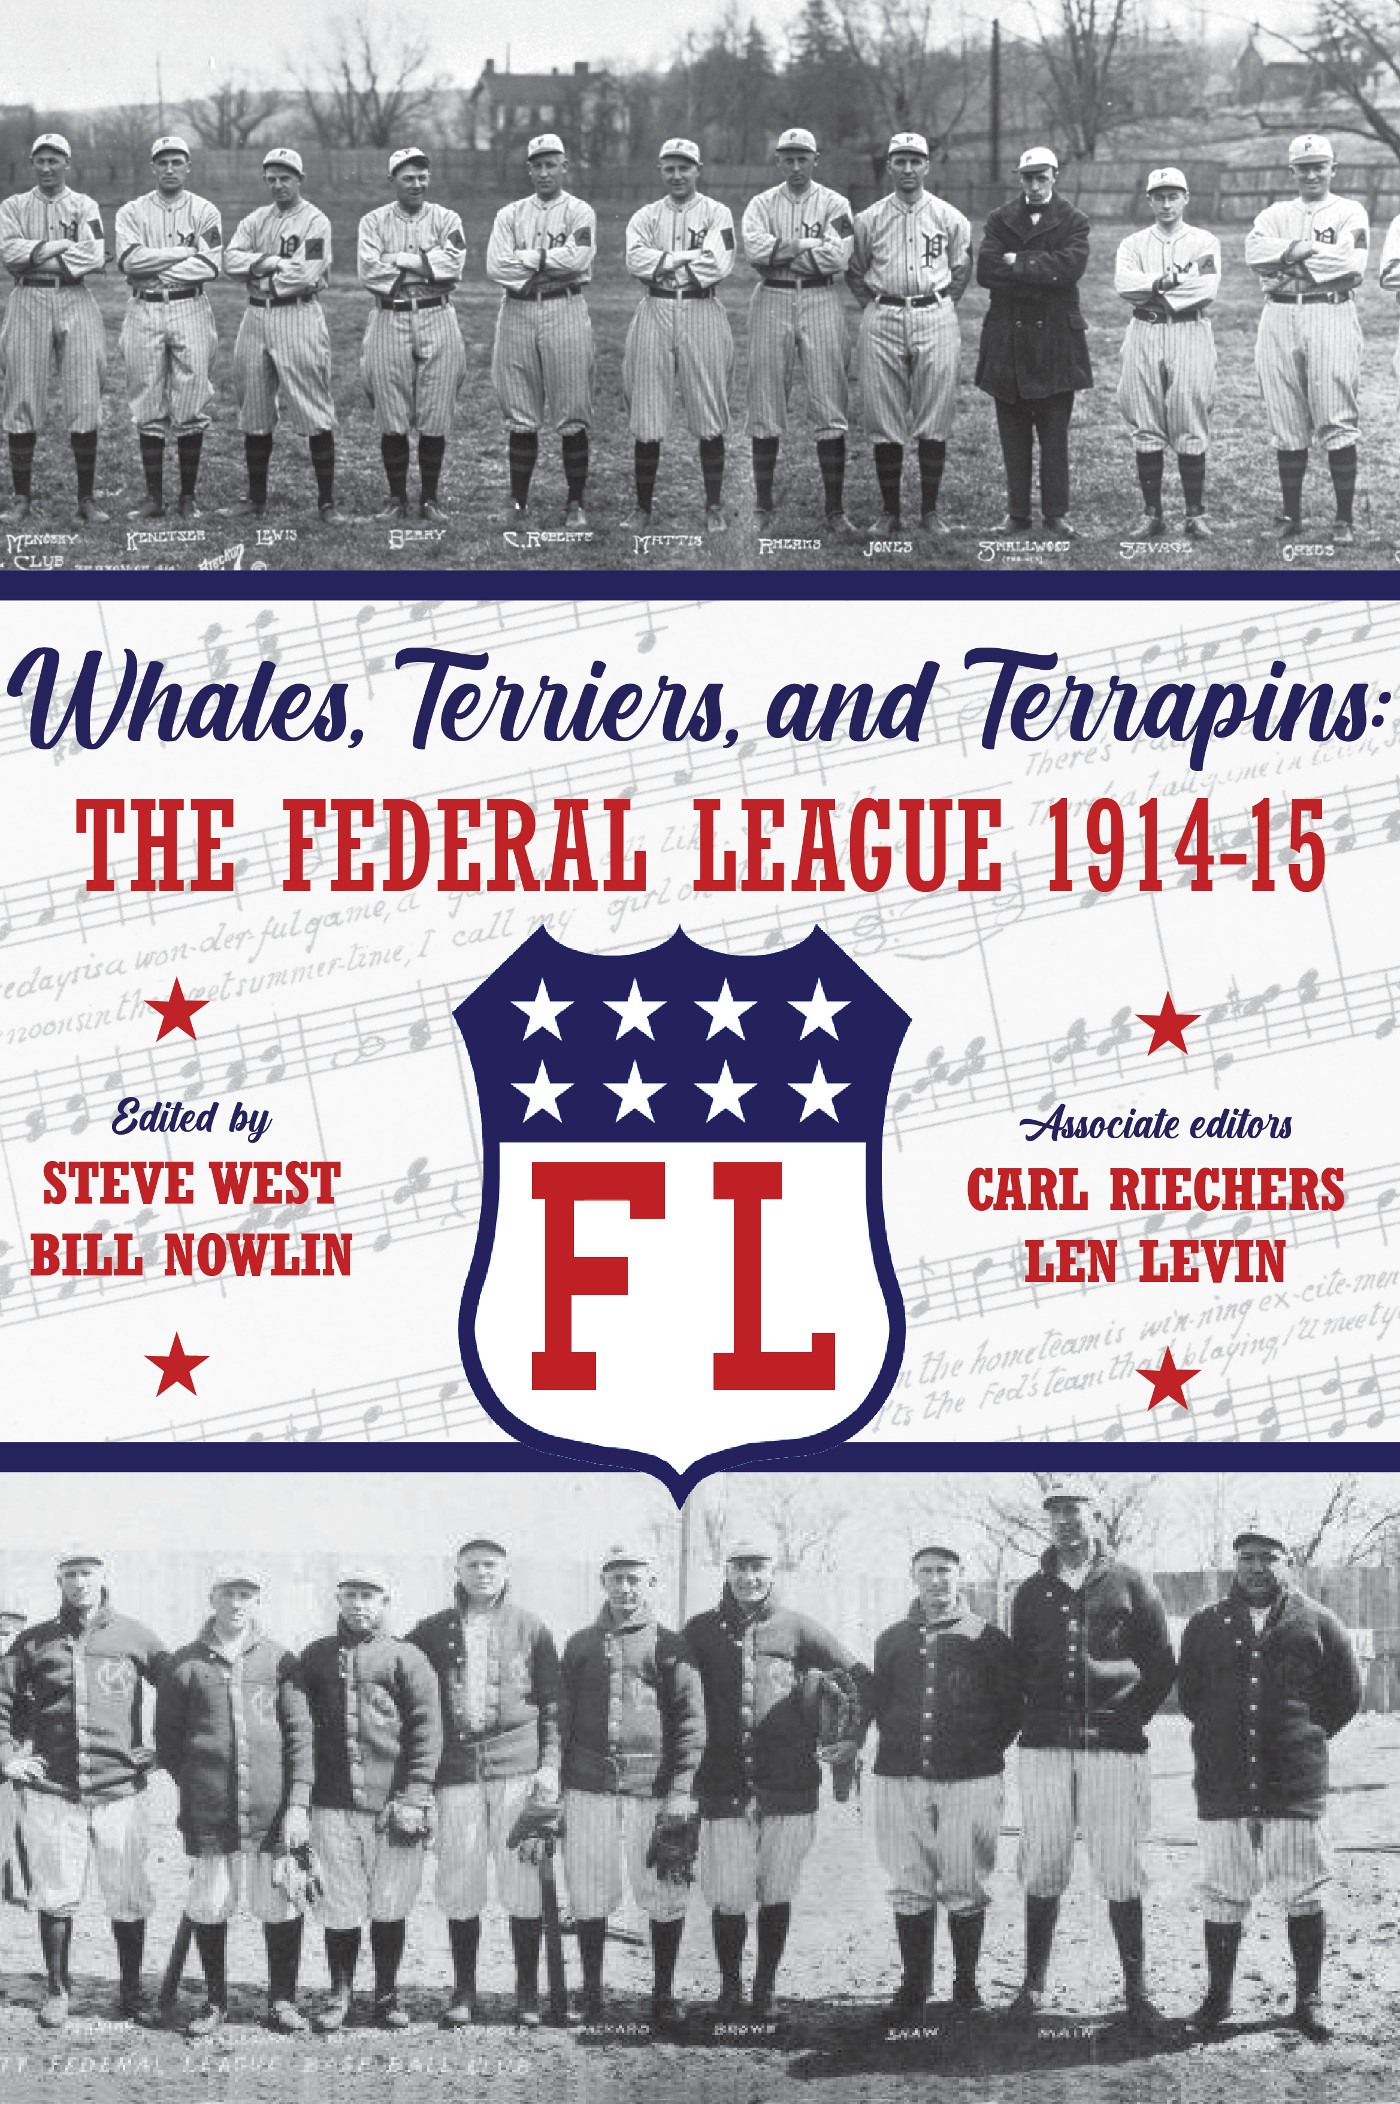 Whales, Terriers, and Terrapins: The Federal League 1914-15